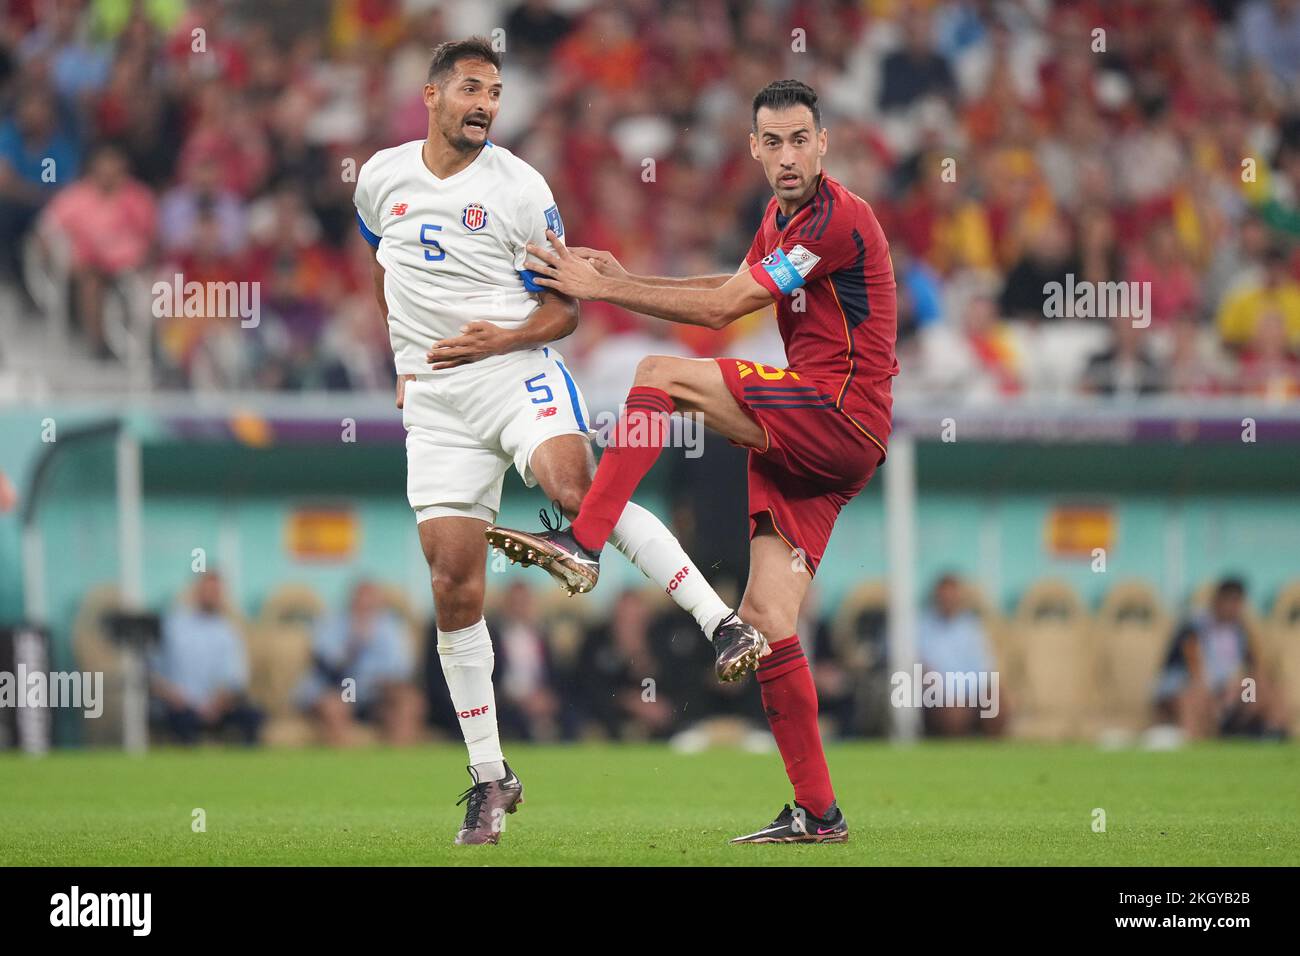 Doha, Qatar. 23rd Nov, 2022. Celso Borges of Costa Rica and Sergio Busquets of Spain during the Qatar 2022 World Cup match, group E, date 1, between Spain and Costa Rica played at Al Thumama Stadium on Nov 23, 2022 in Doha, Qatar. (Photo by Bagu Blanco / PRESSINPHOTO) Credit: PRESSINPHOTO SPORTS AGENCY/Alamy Live News Credit: PRESSINPHOTO SPORTS AGENCY/Alamy Live News Stock Photo